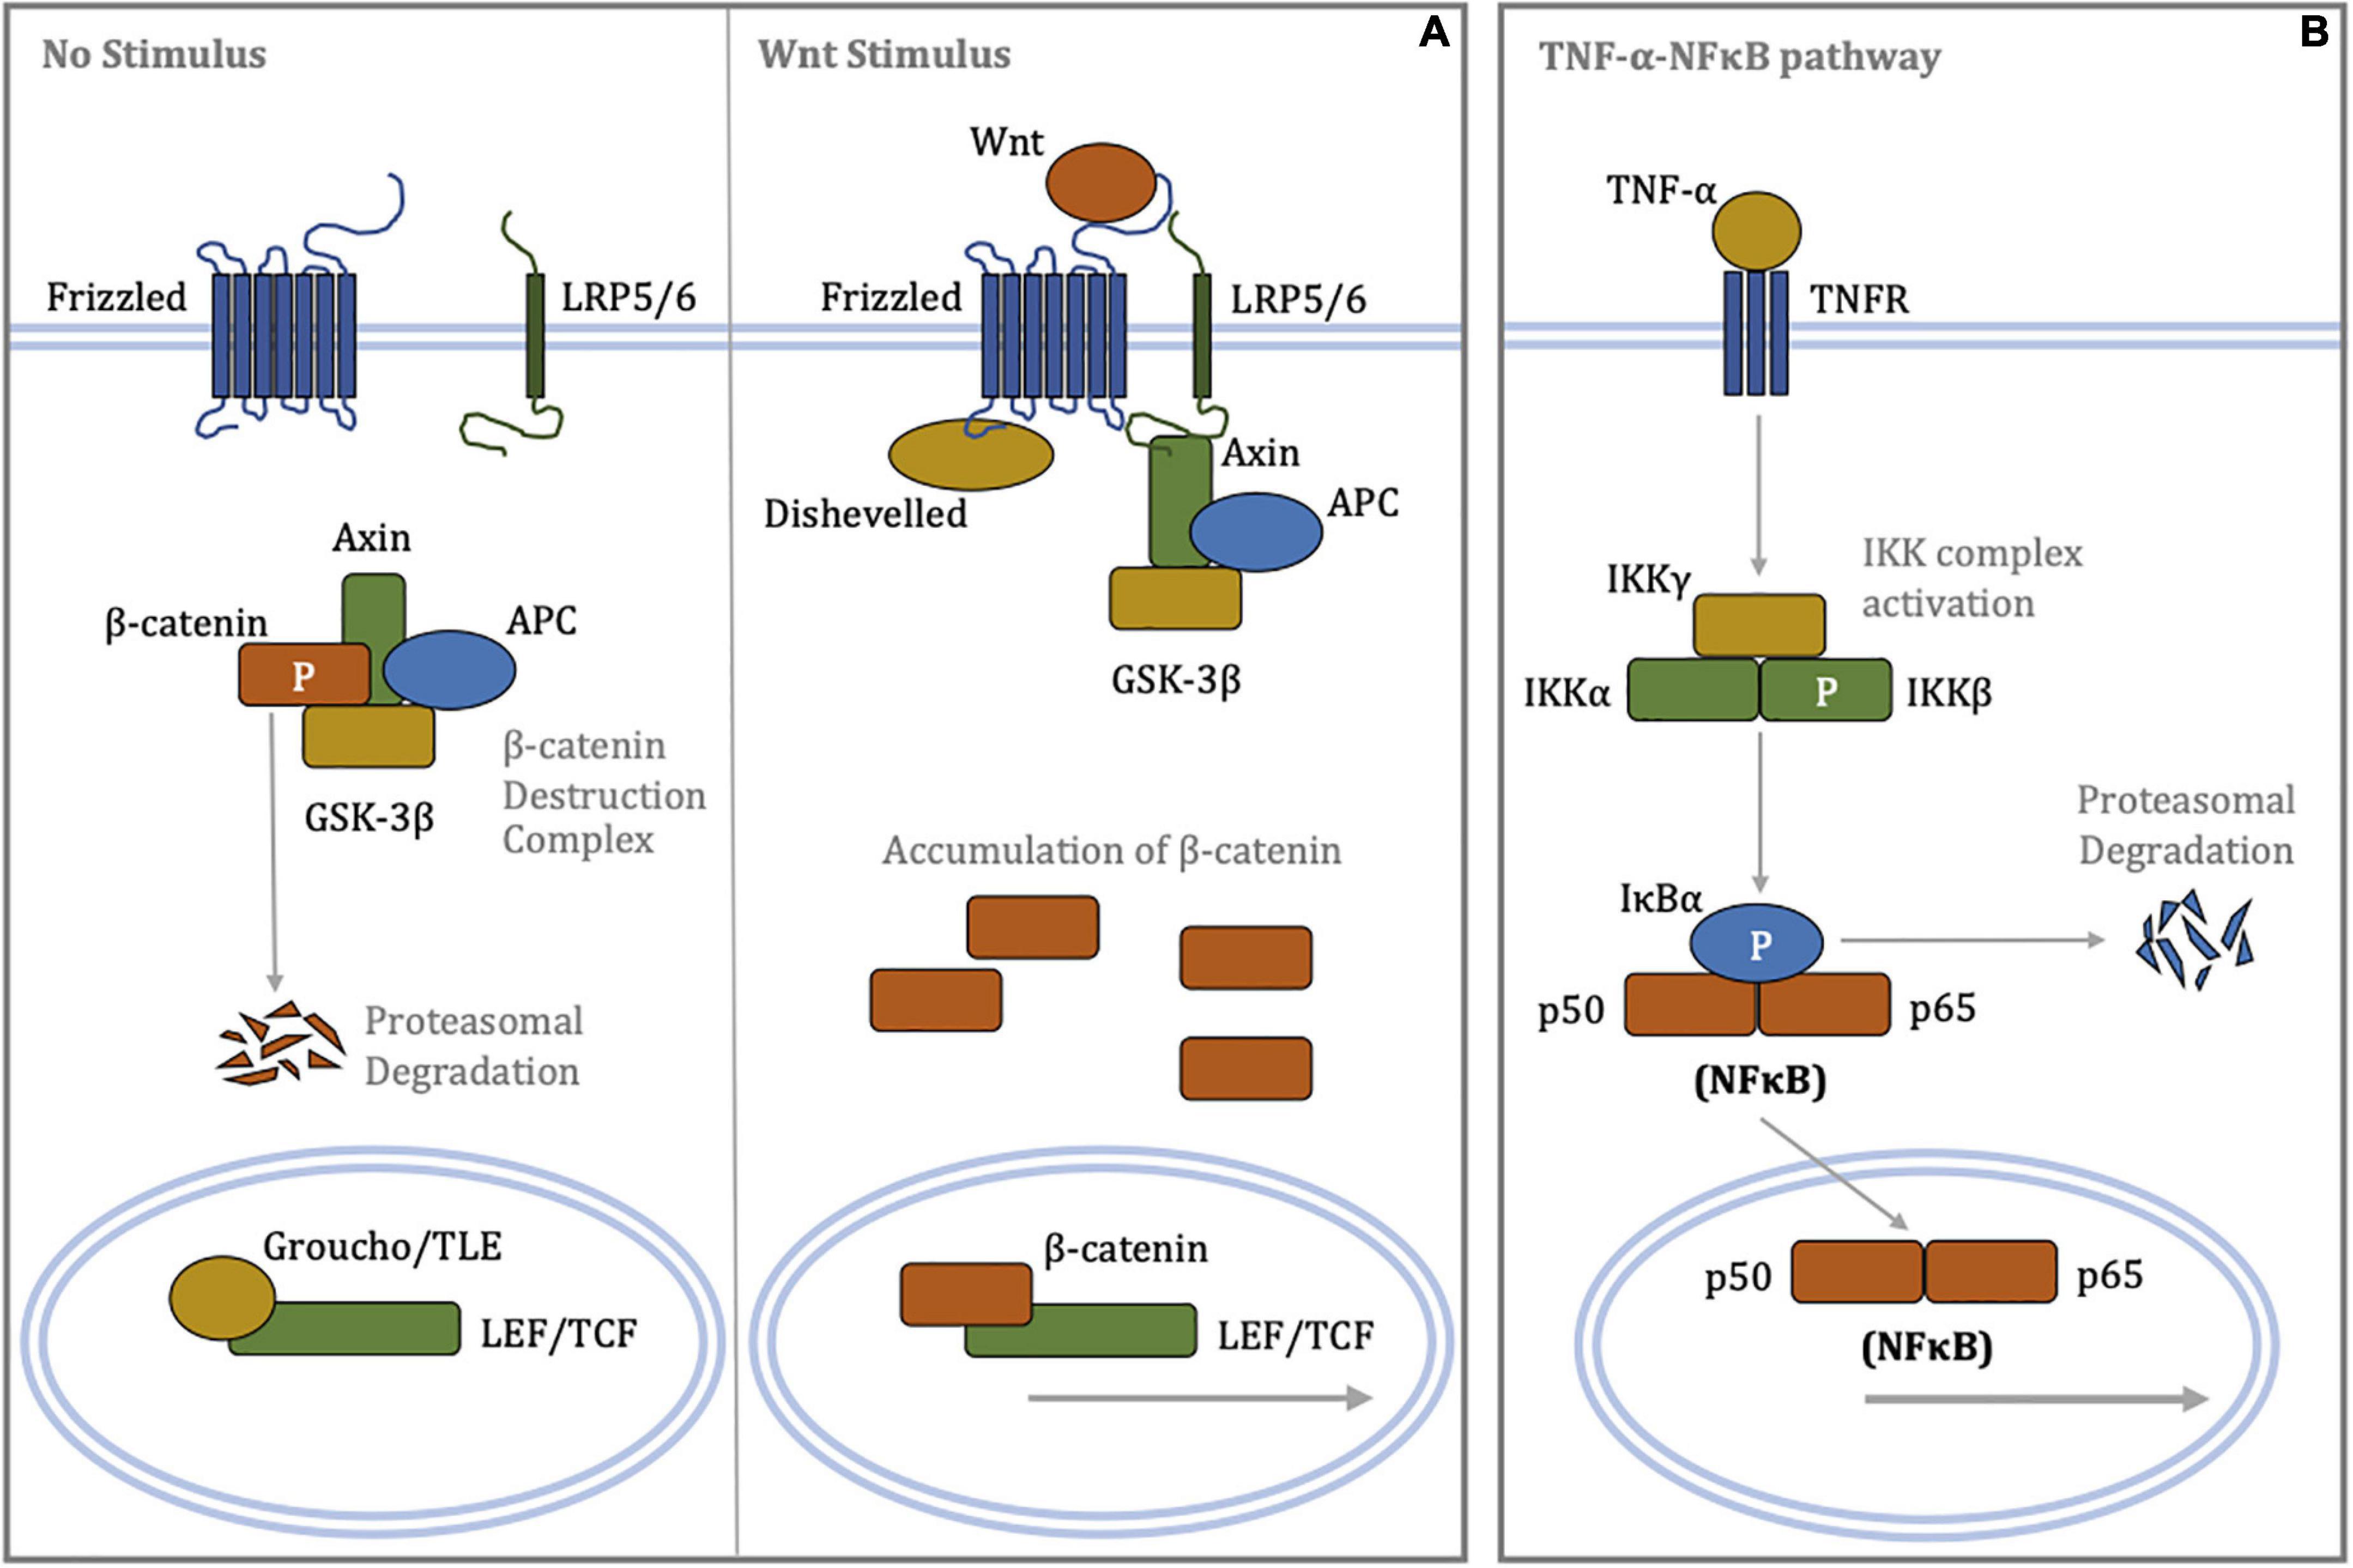 Pro-inflammatory role of Wnt/β-catenin signaling in endothelial dysfunction